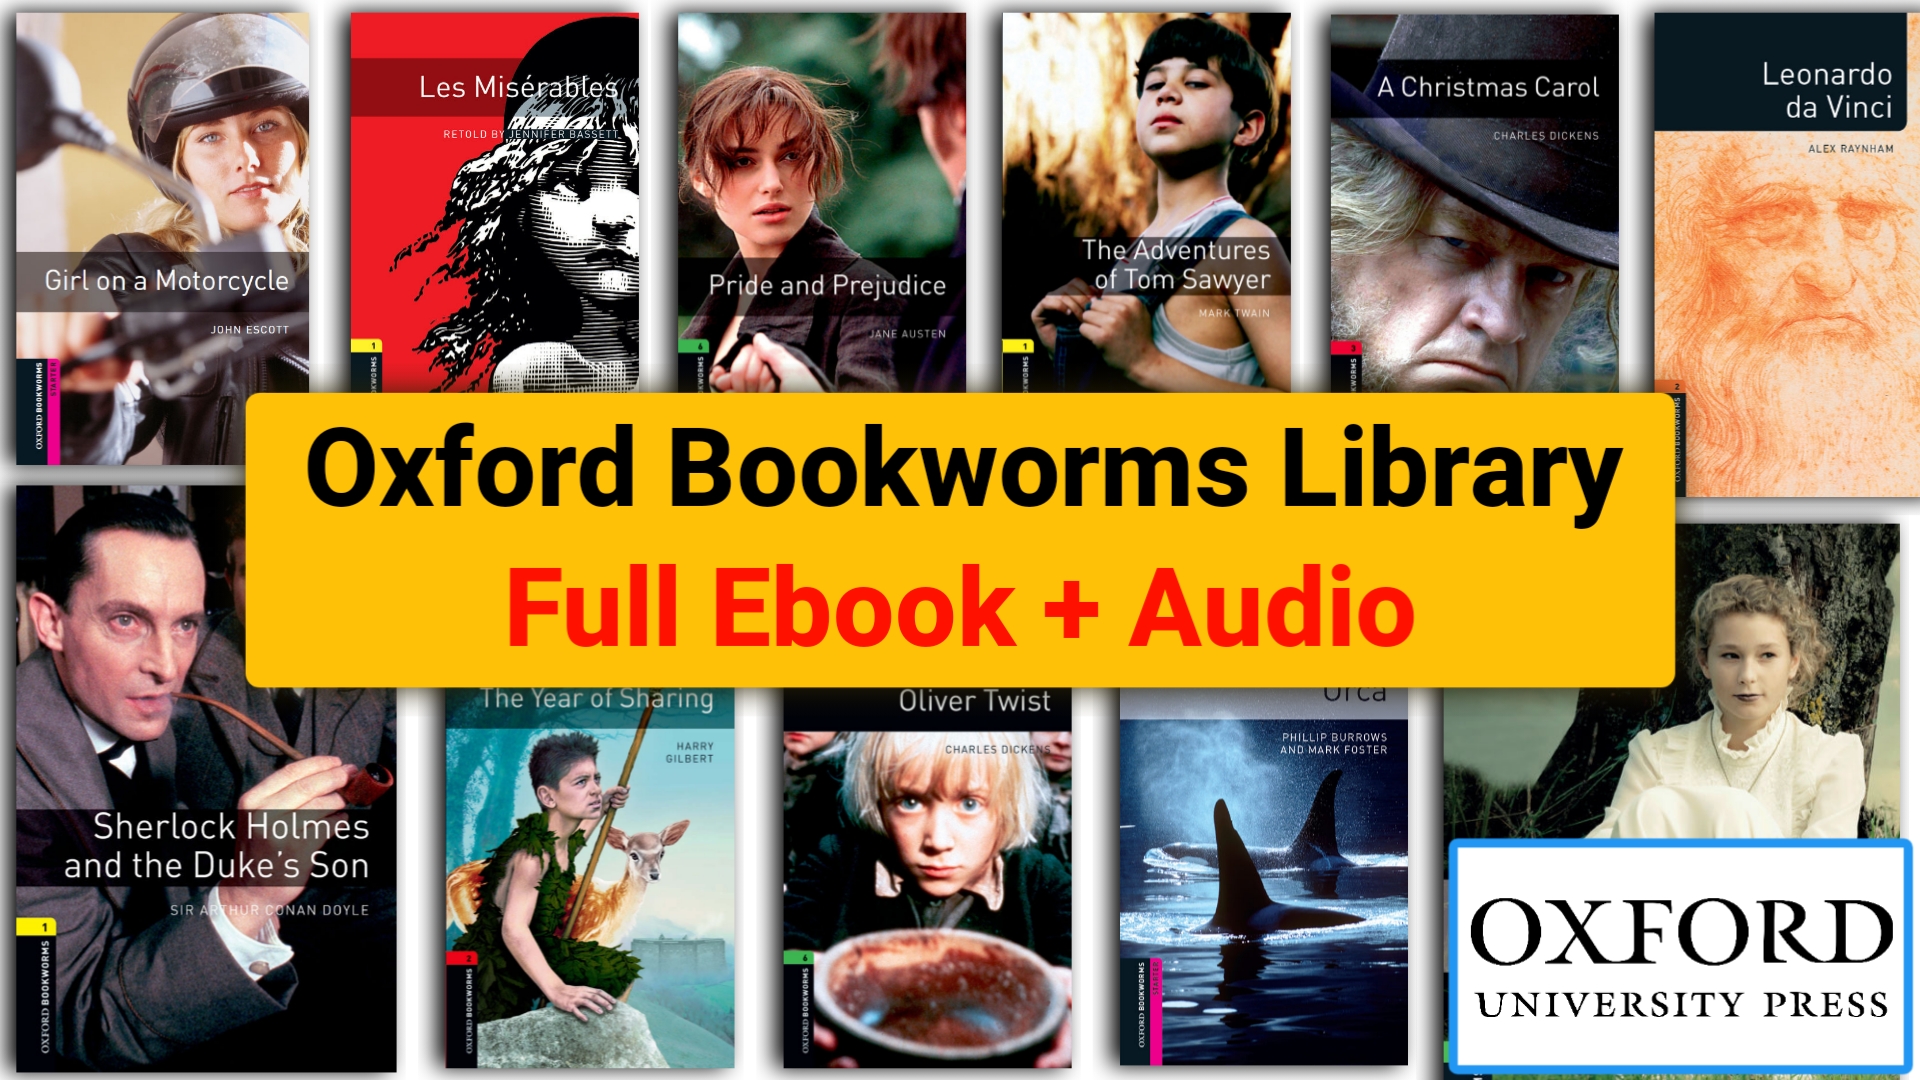 Oxford Bookworms Library Full 7 Stage - Download Ebook + Audio 2022